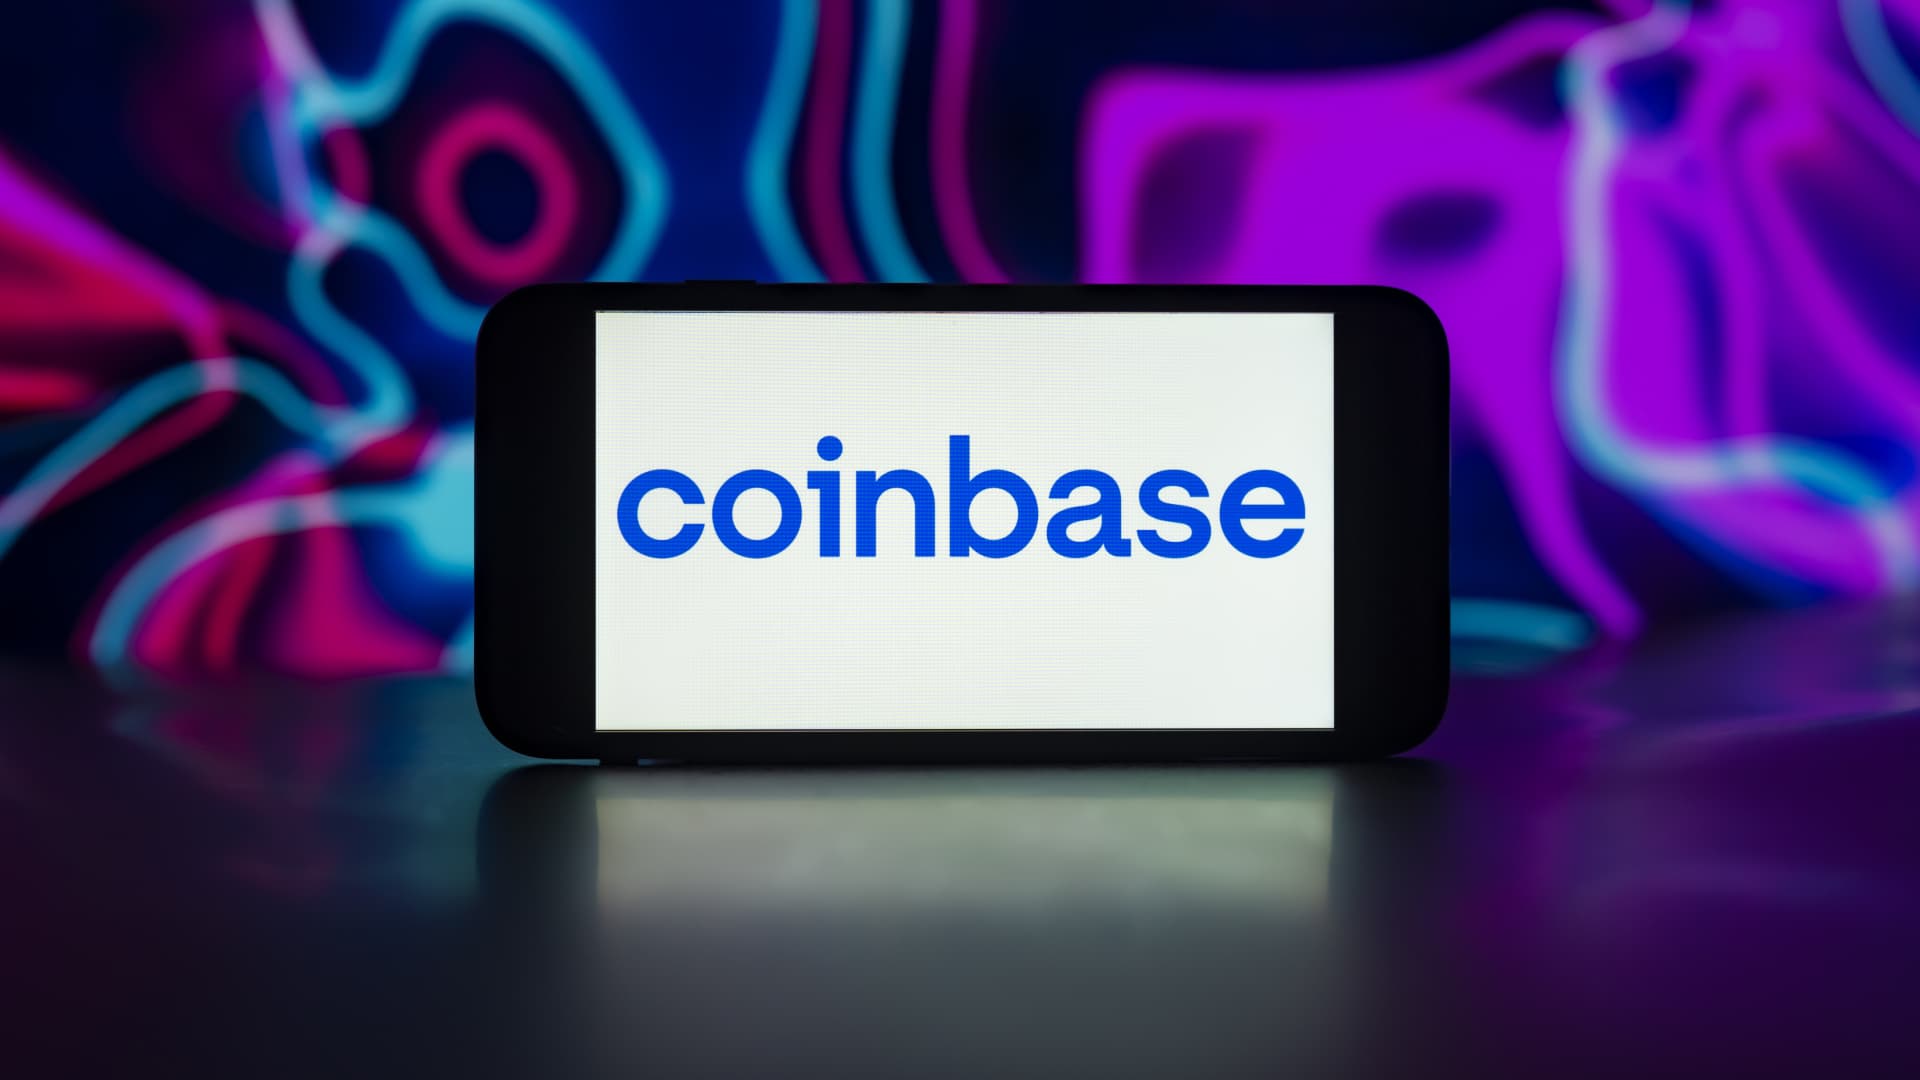 Coinbase (COIN) share surge 13% after earnings